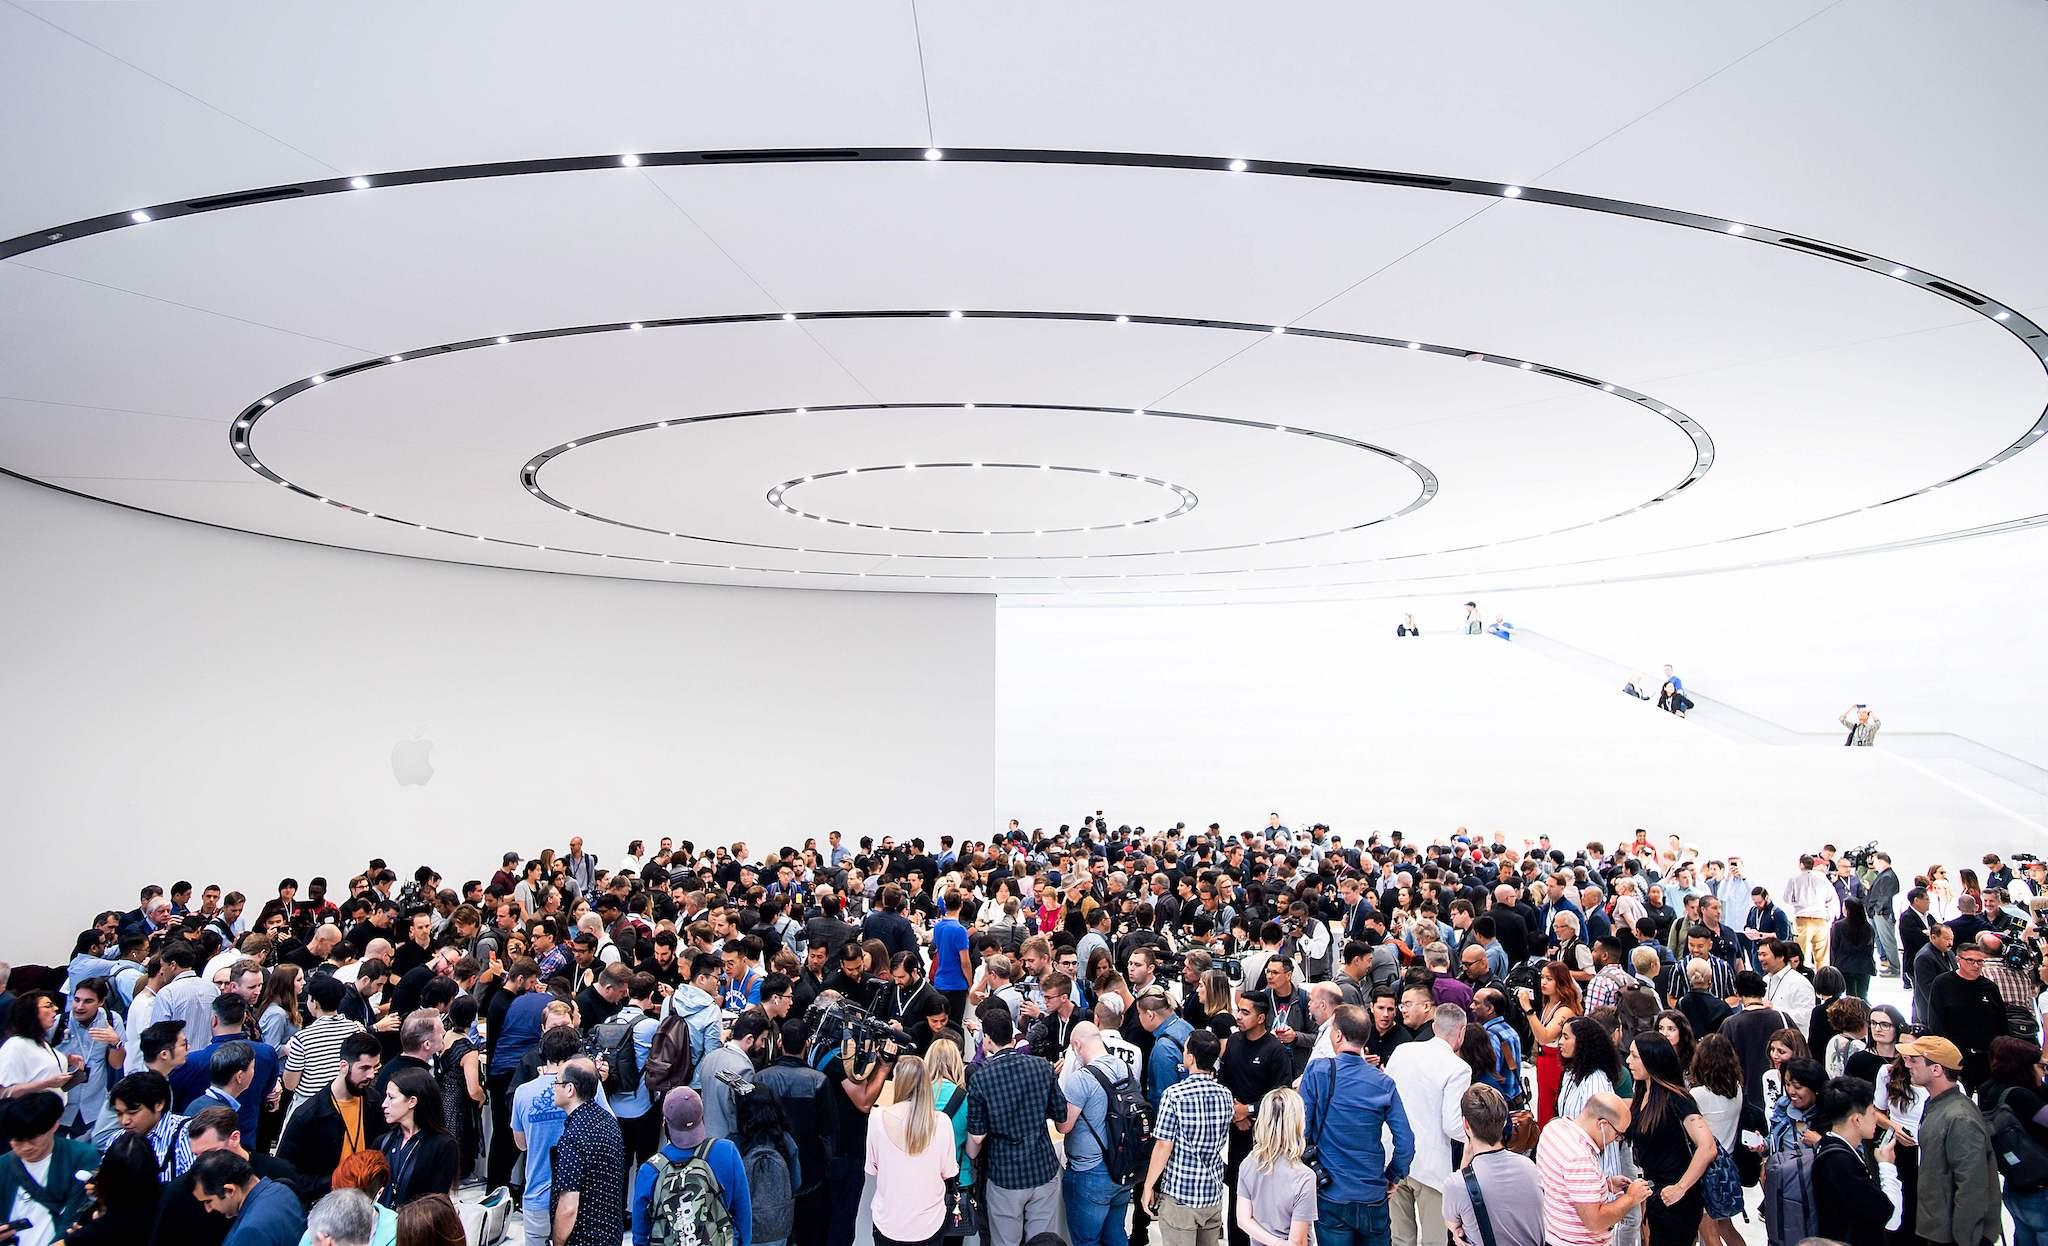 In this file photo taken on September 12, 2018 attendees gather for a product launch event at Apple's Steve Jobs Theater in Cupertino, California